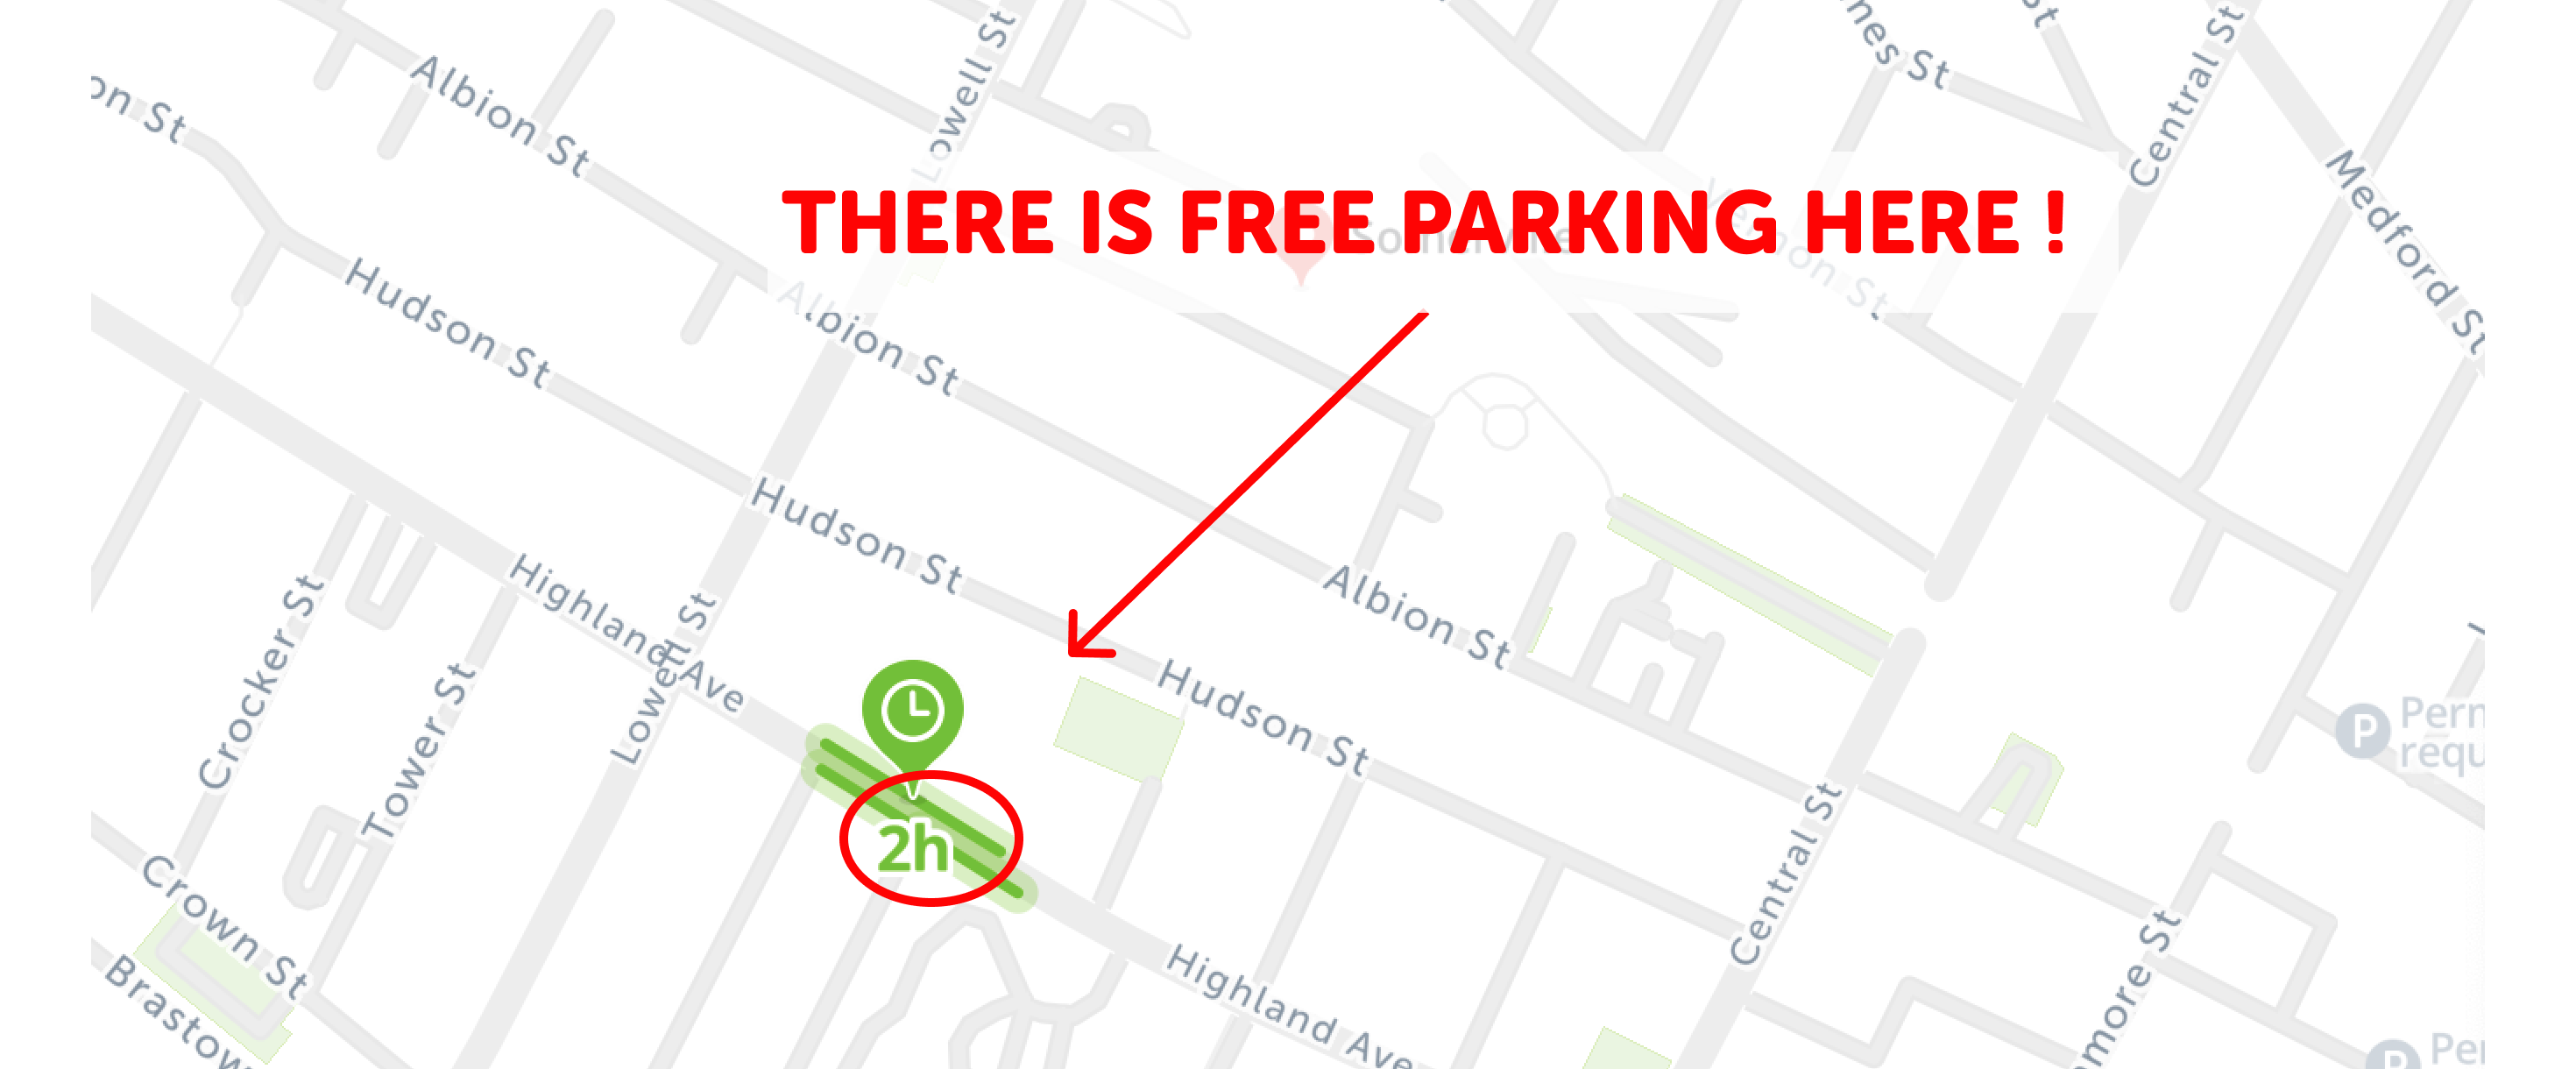 How to Find Free Overnight Parking